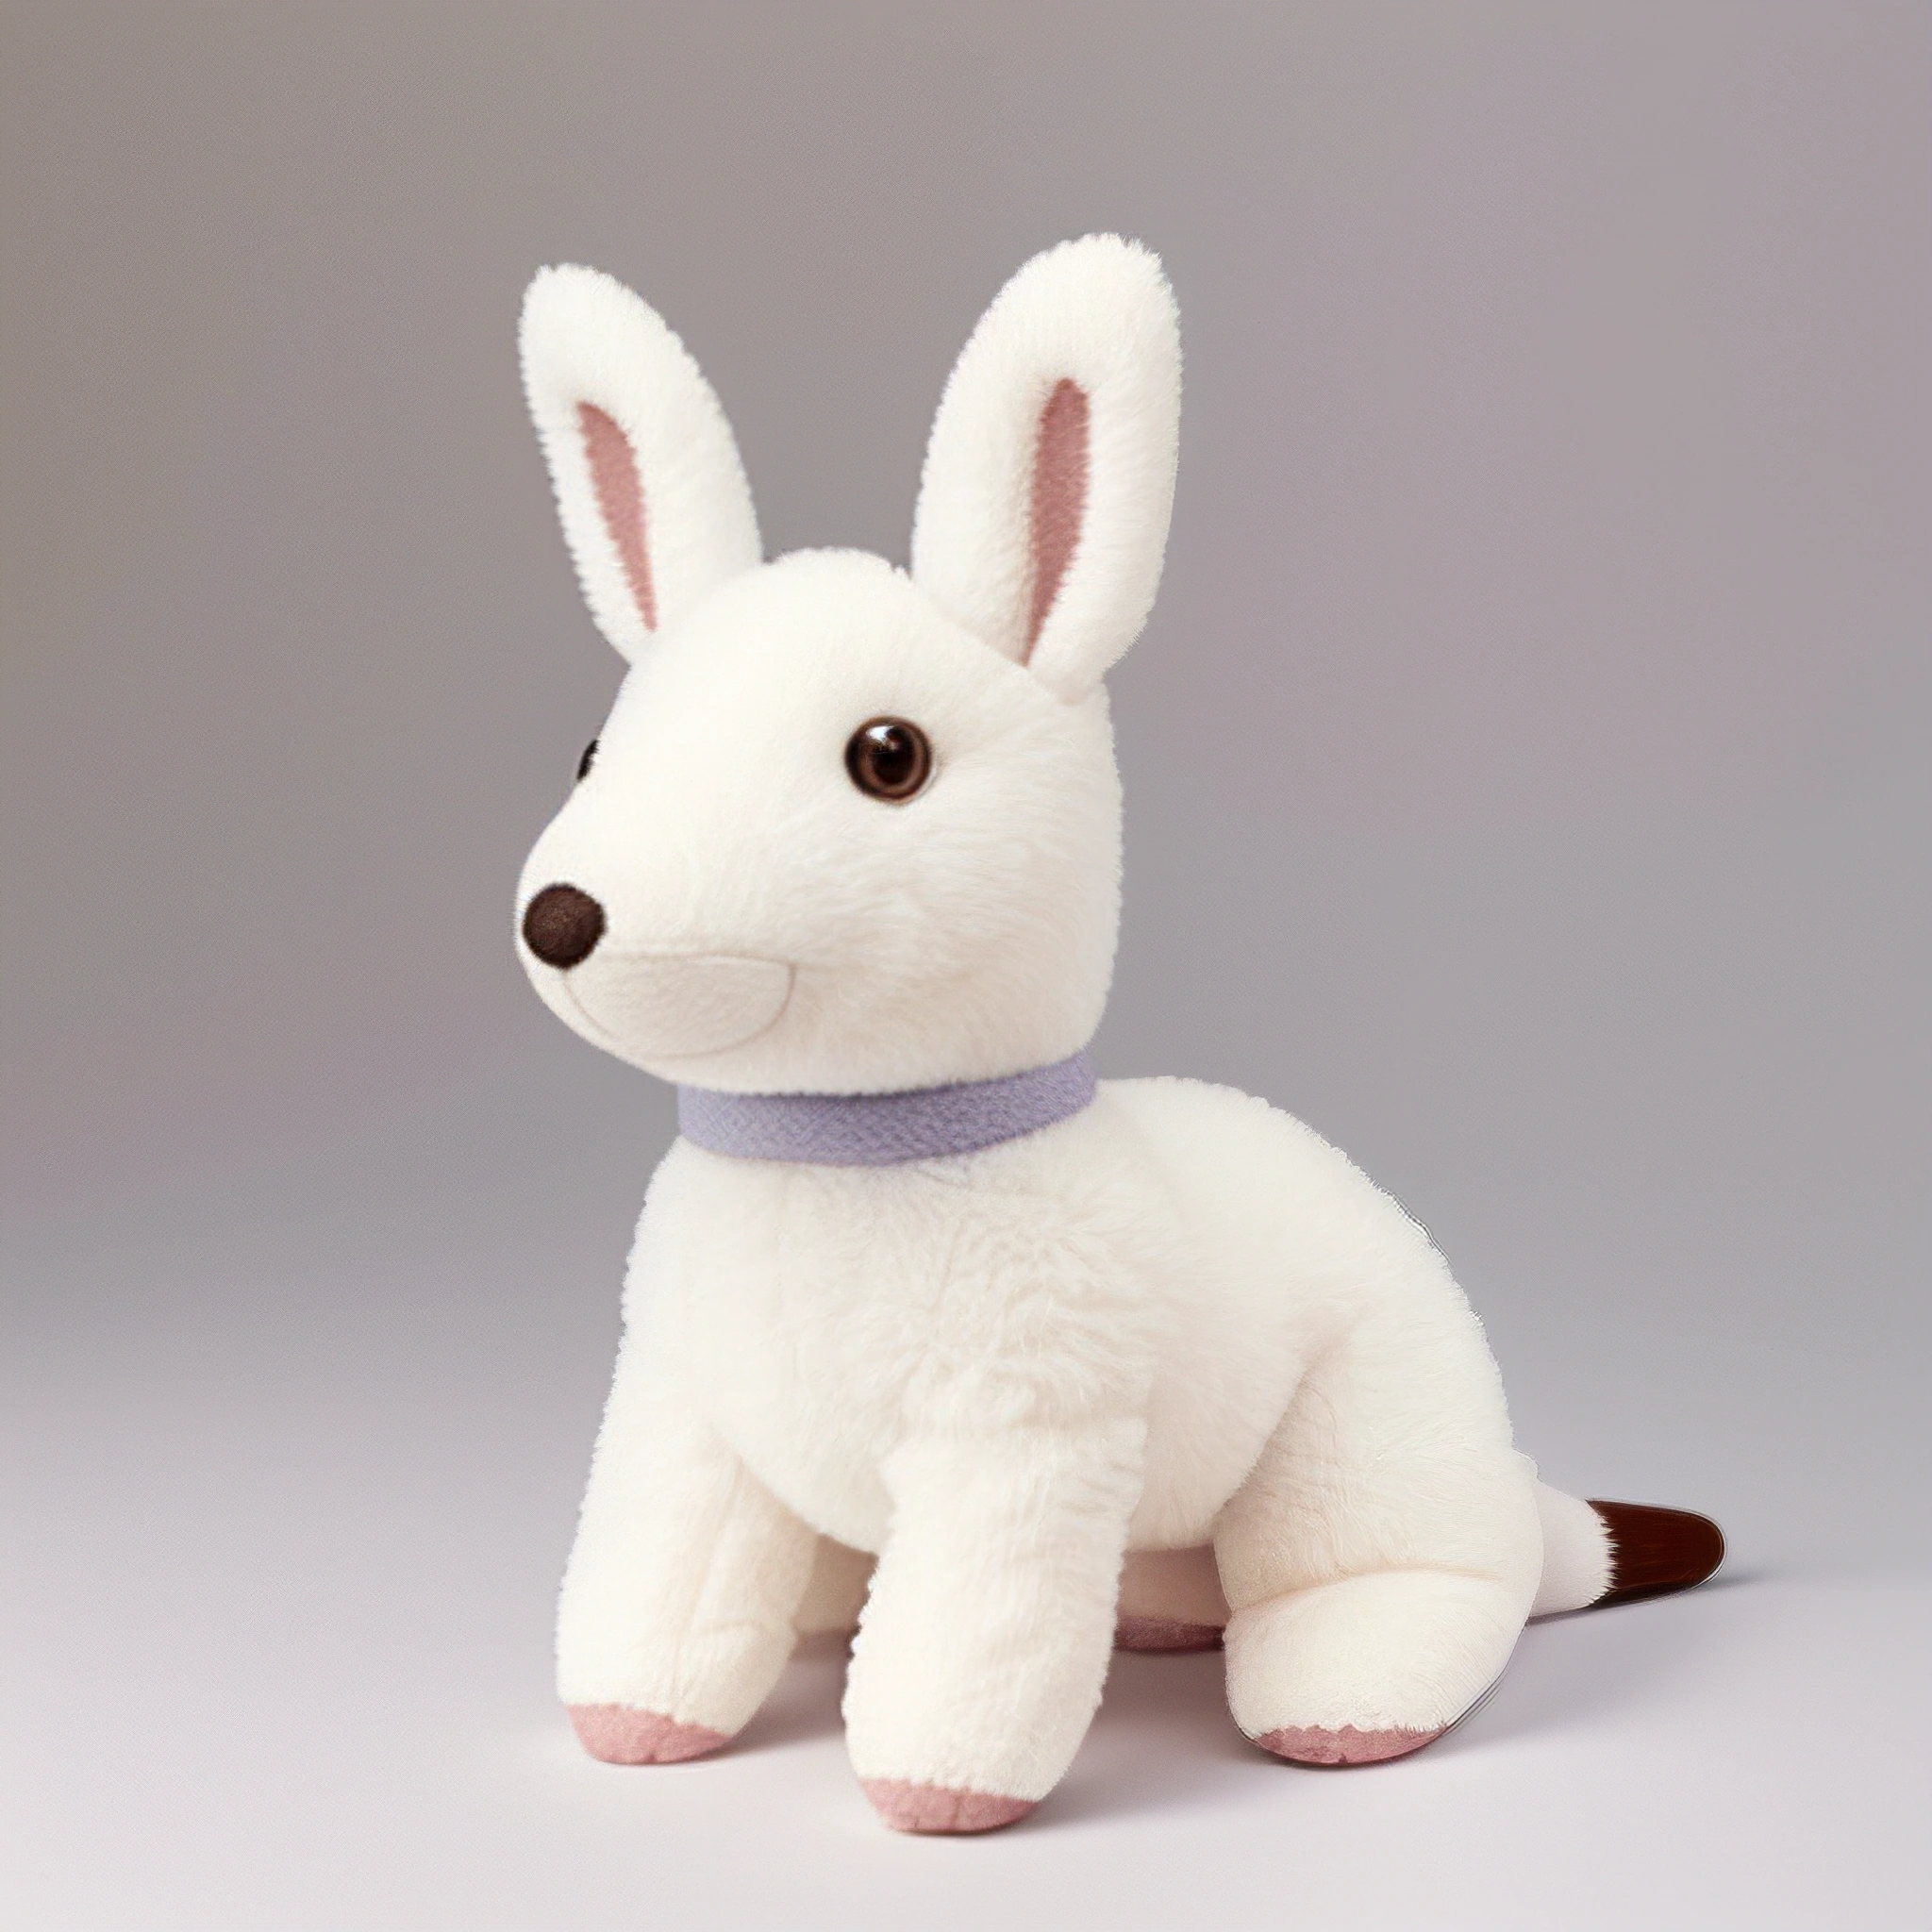 a white stuffed animal with a purple collar on